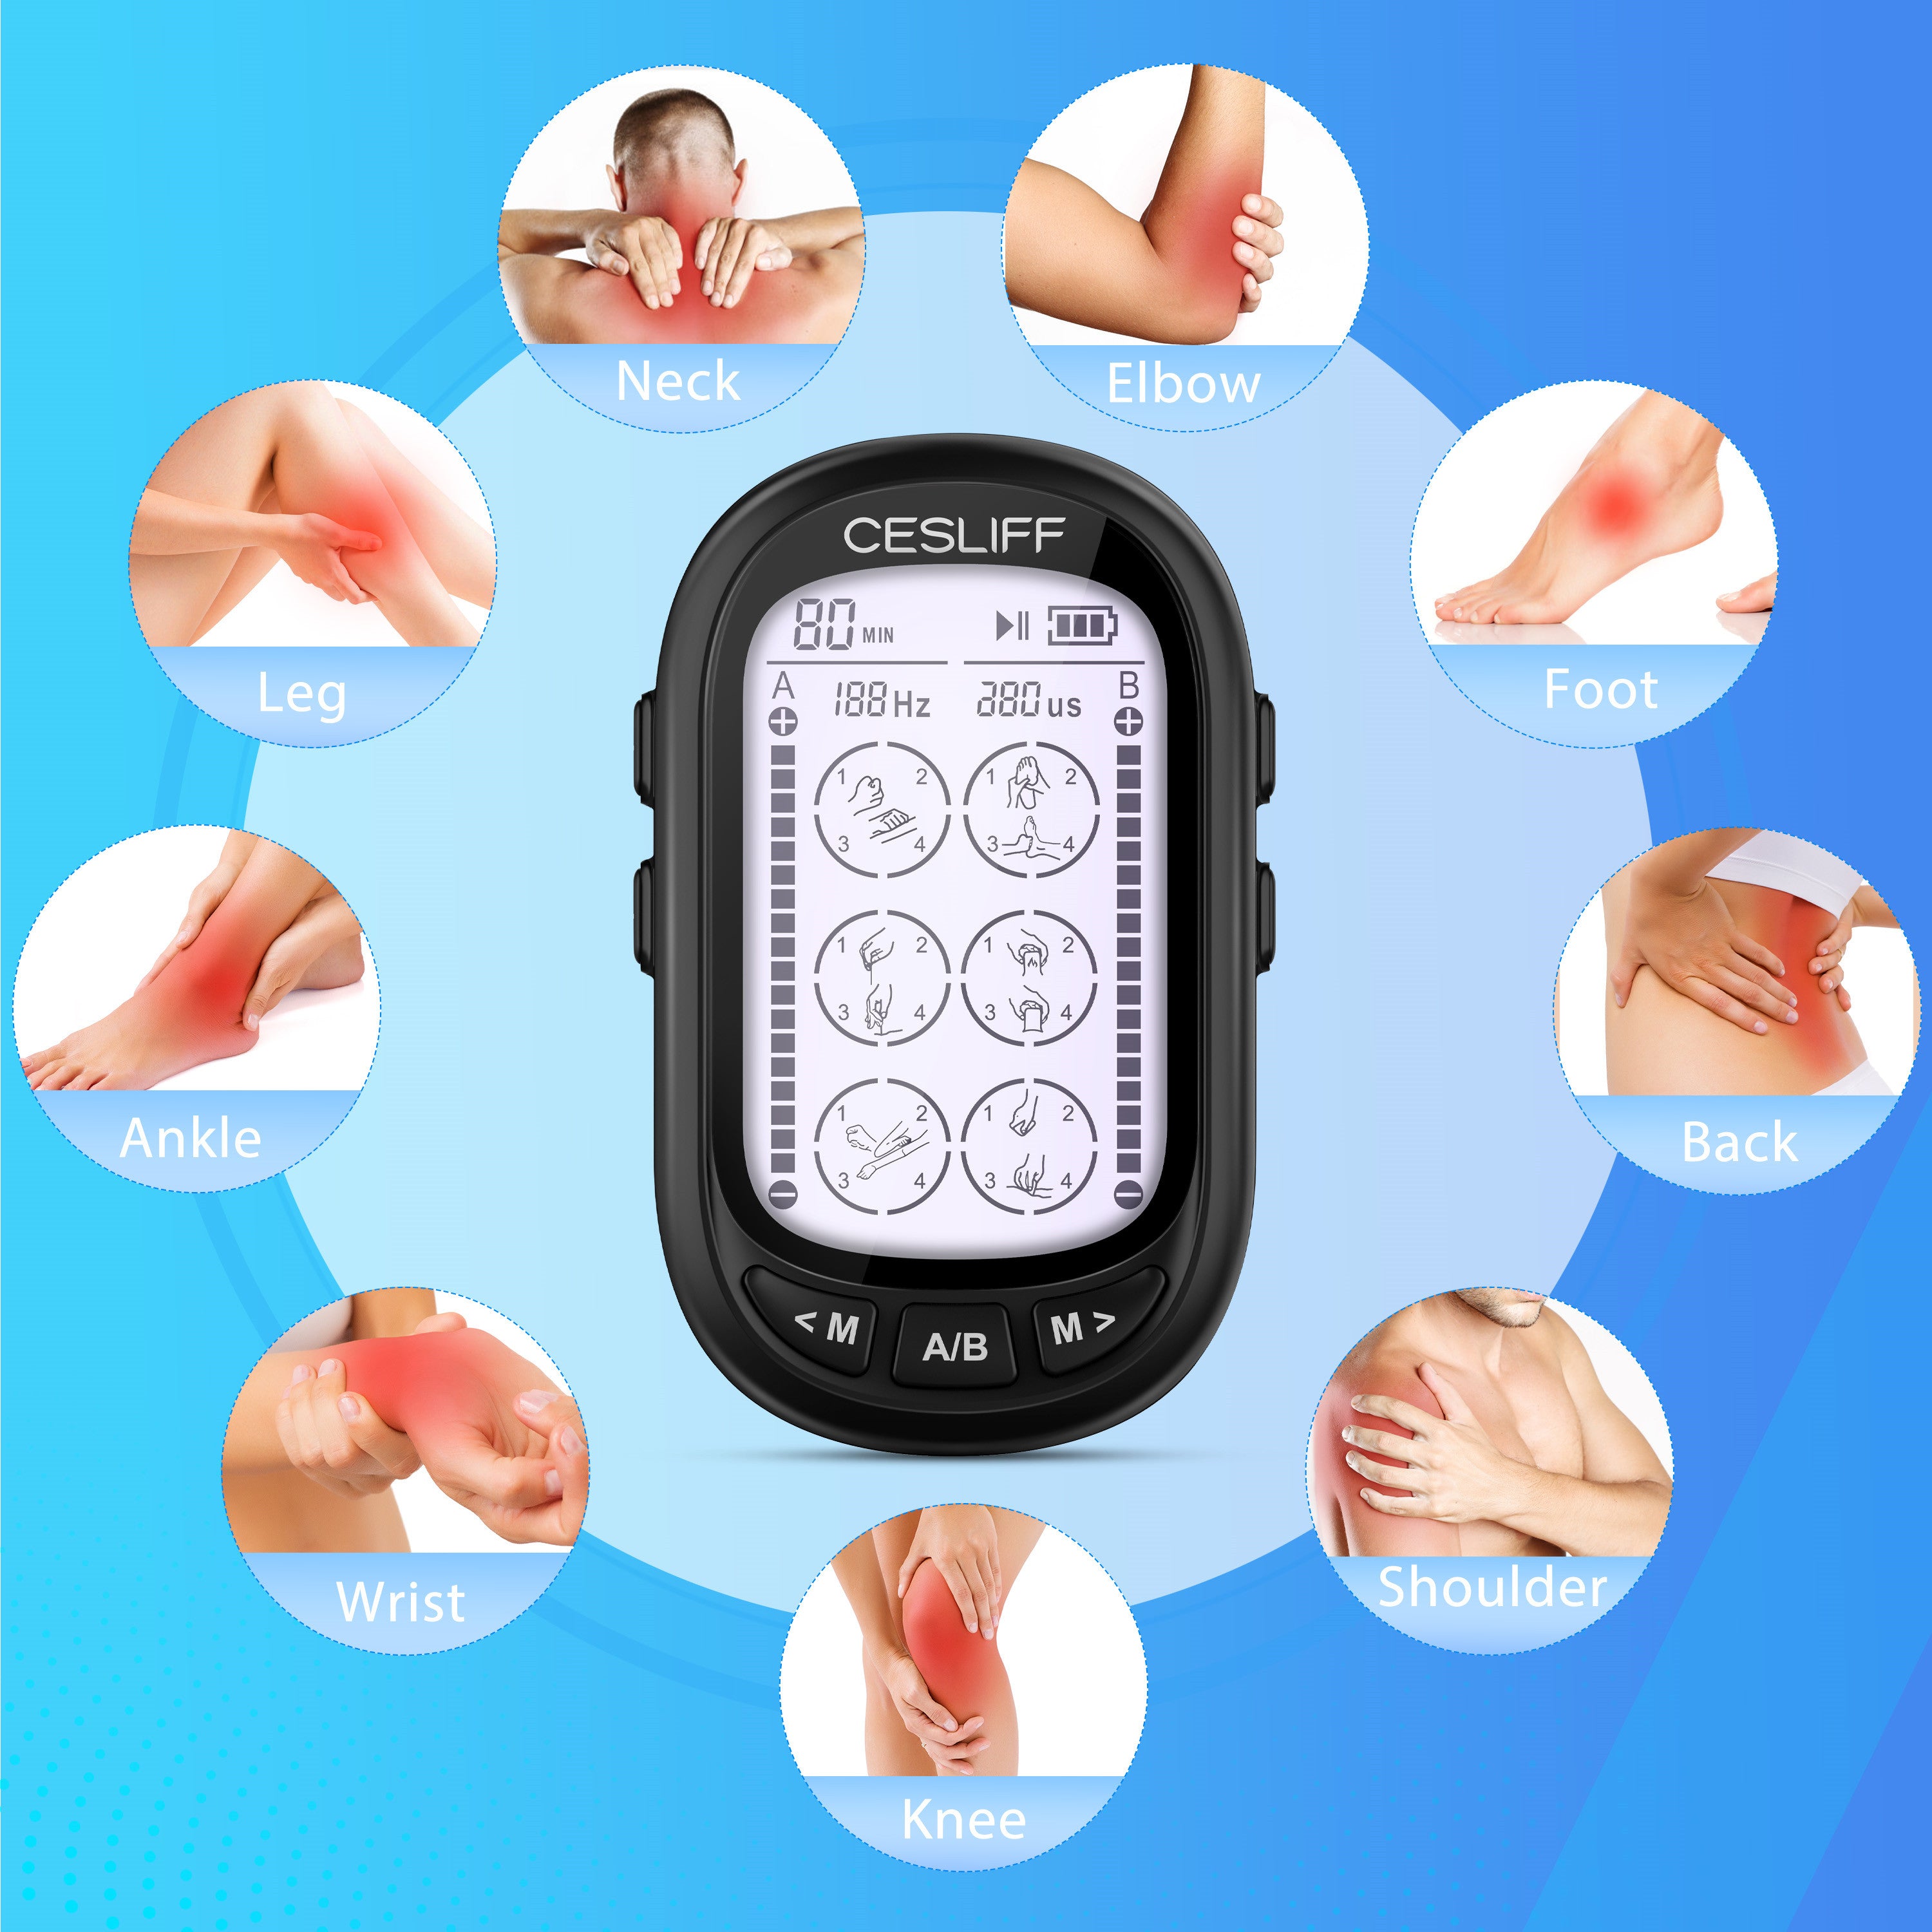 U.S. Jaclean FDA Cleared Tens Unit Electronic Pulse Massager for